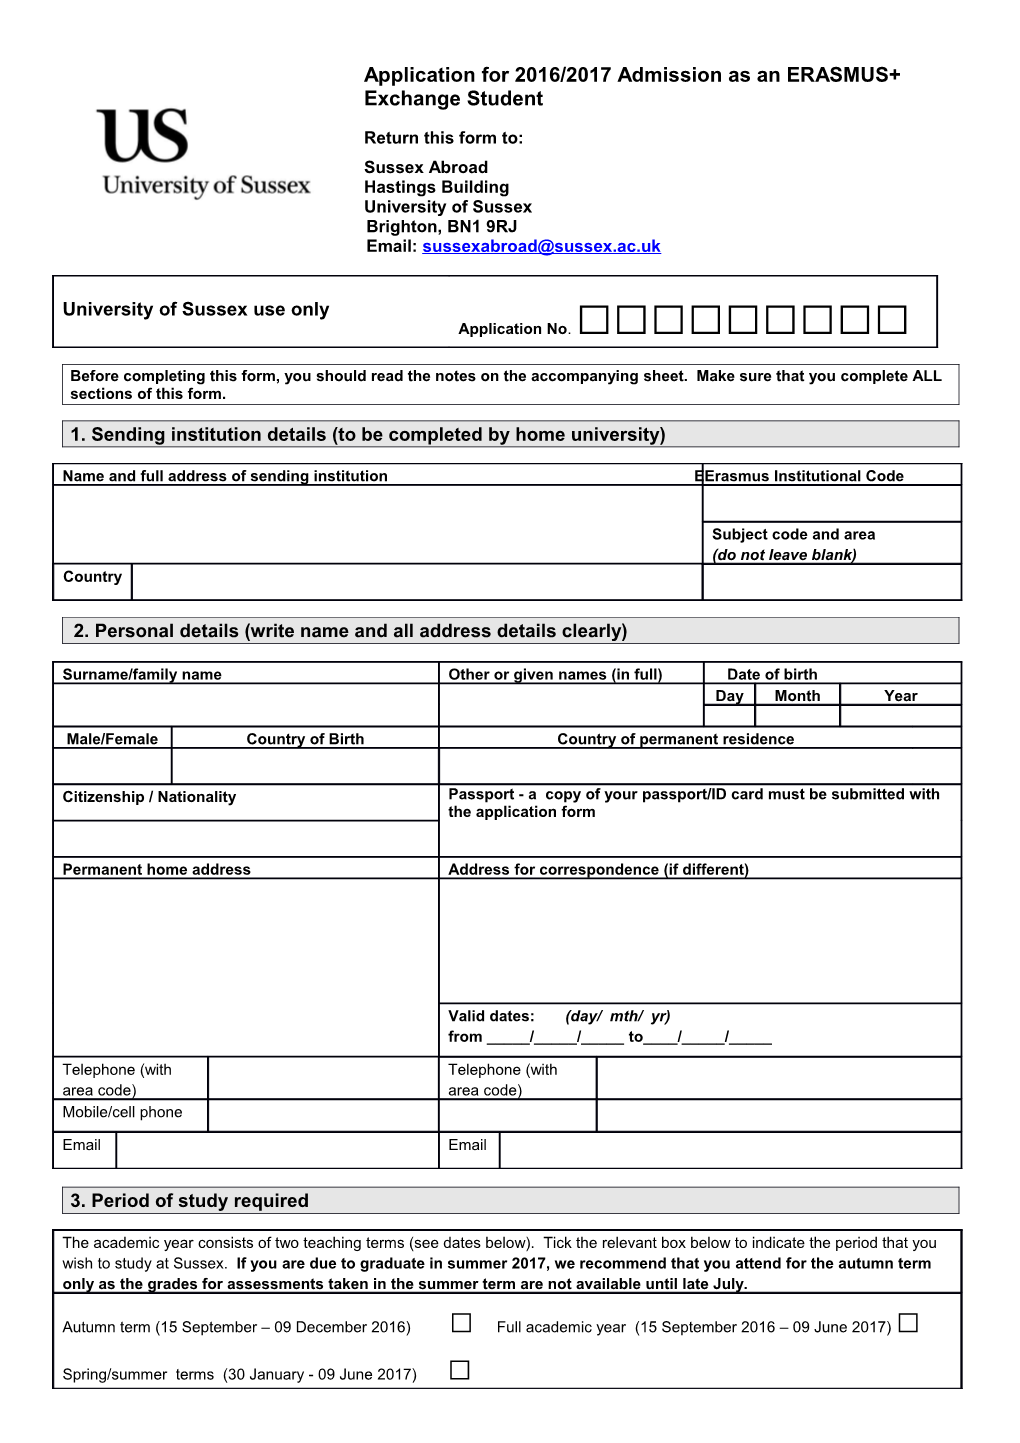 Before Completing This Form You Should Read the Notes on the Accompanying Sheet